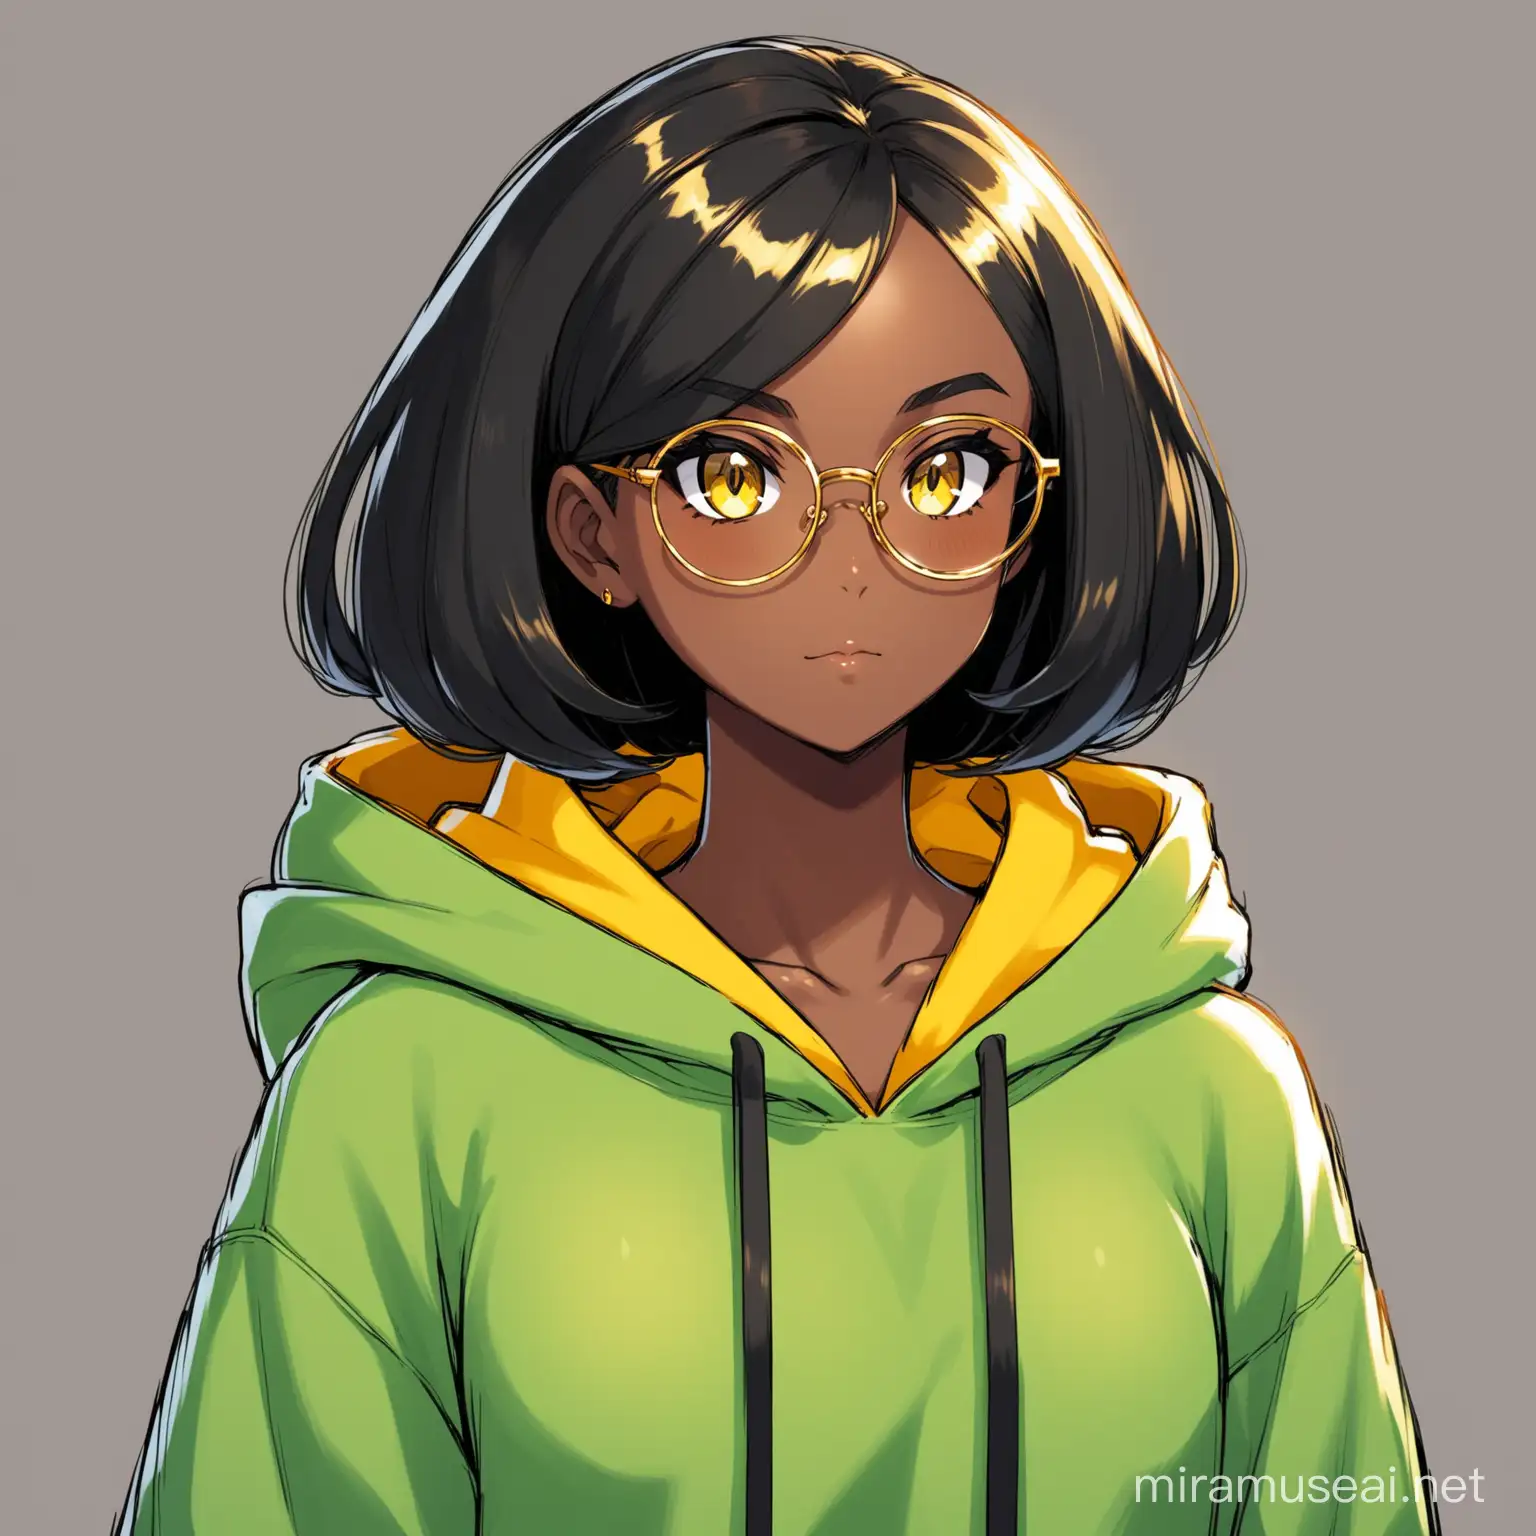 AnimeInspired Portrait of a Black Girl with Golden Eyes and Glasses in a Green Hoodie